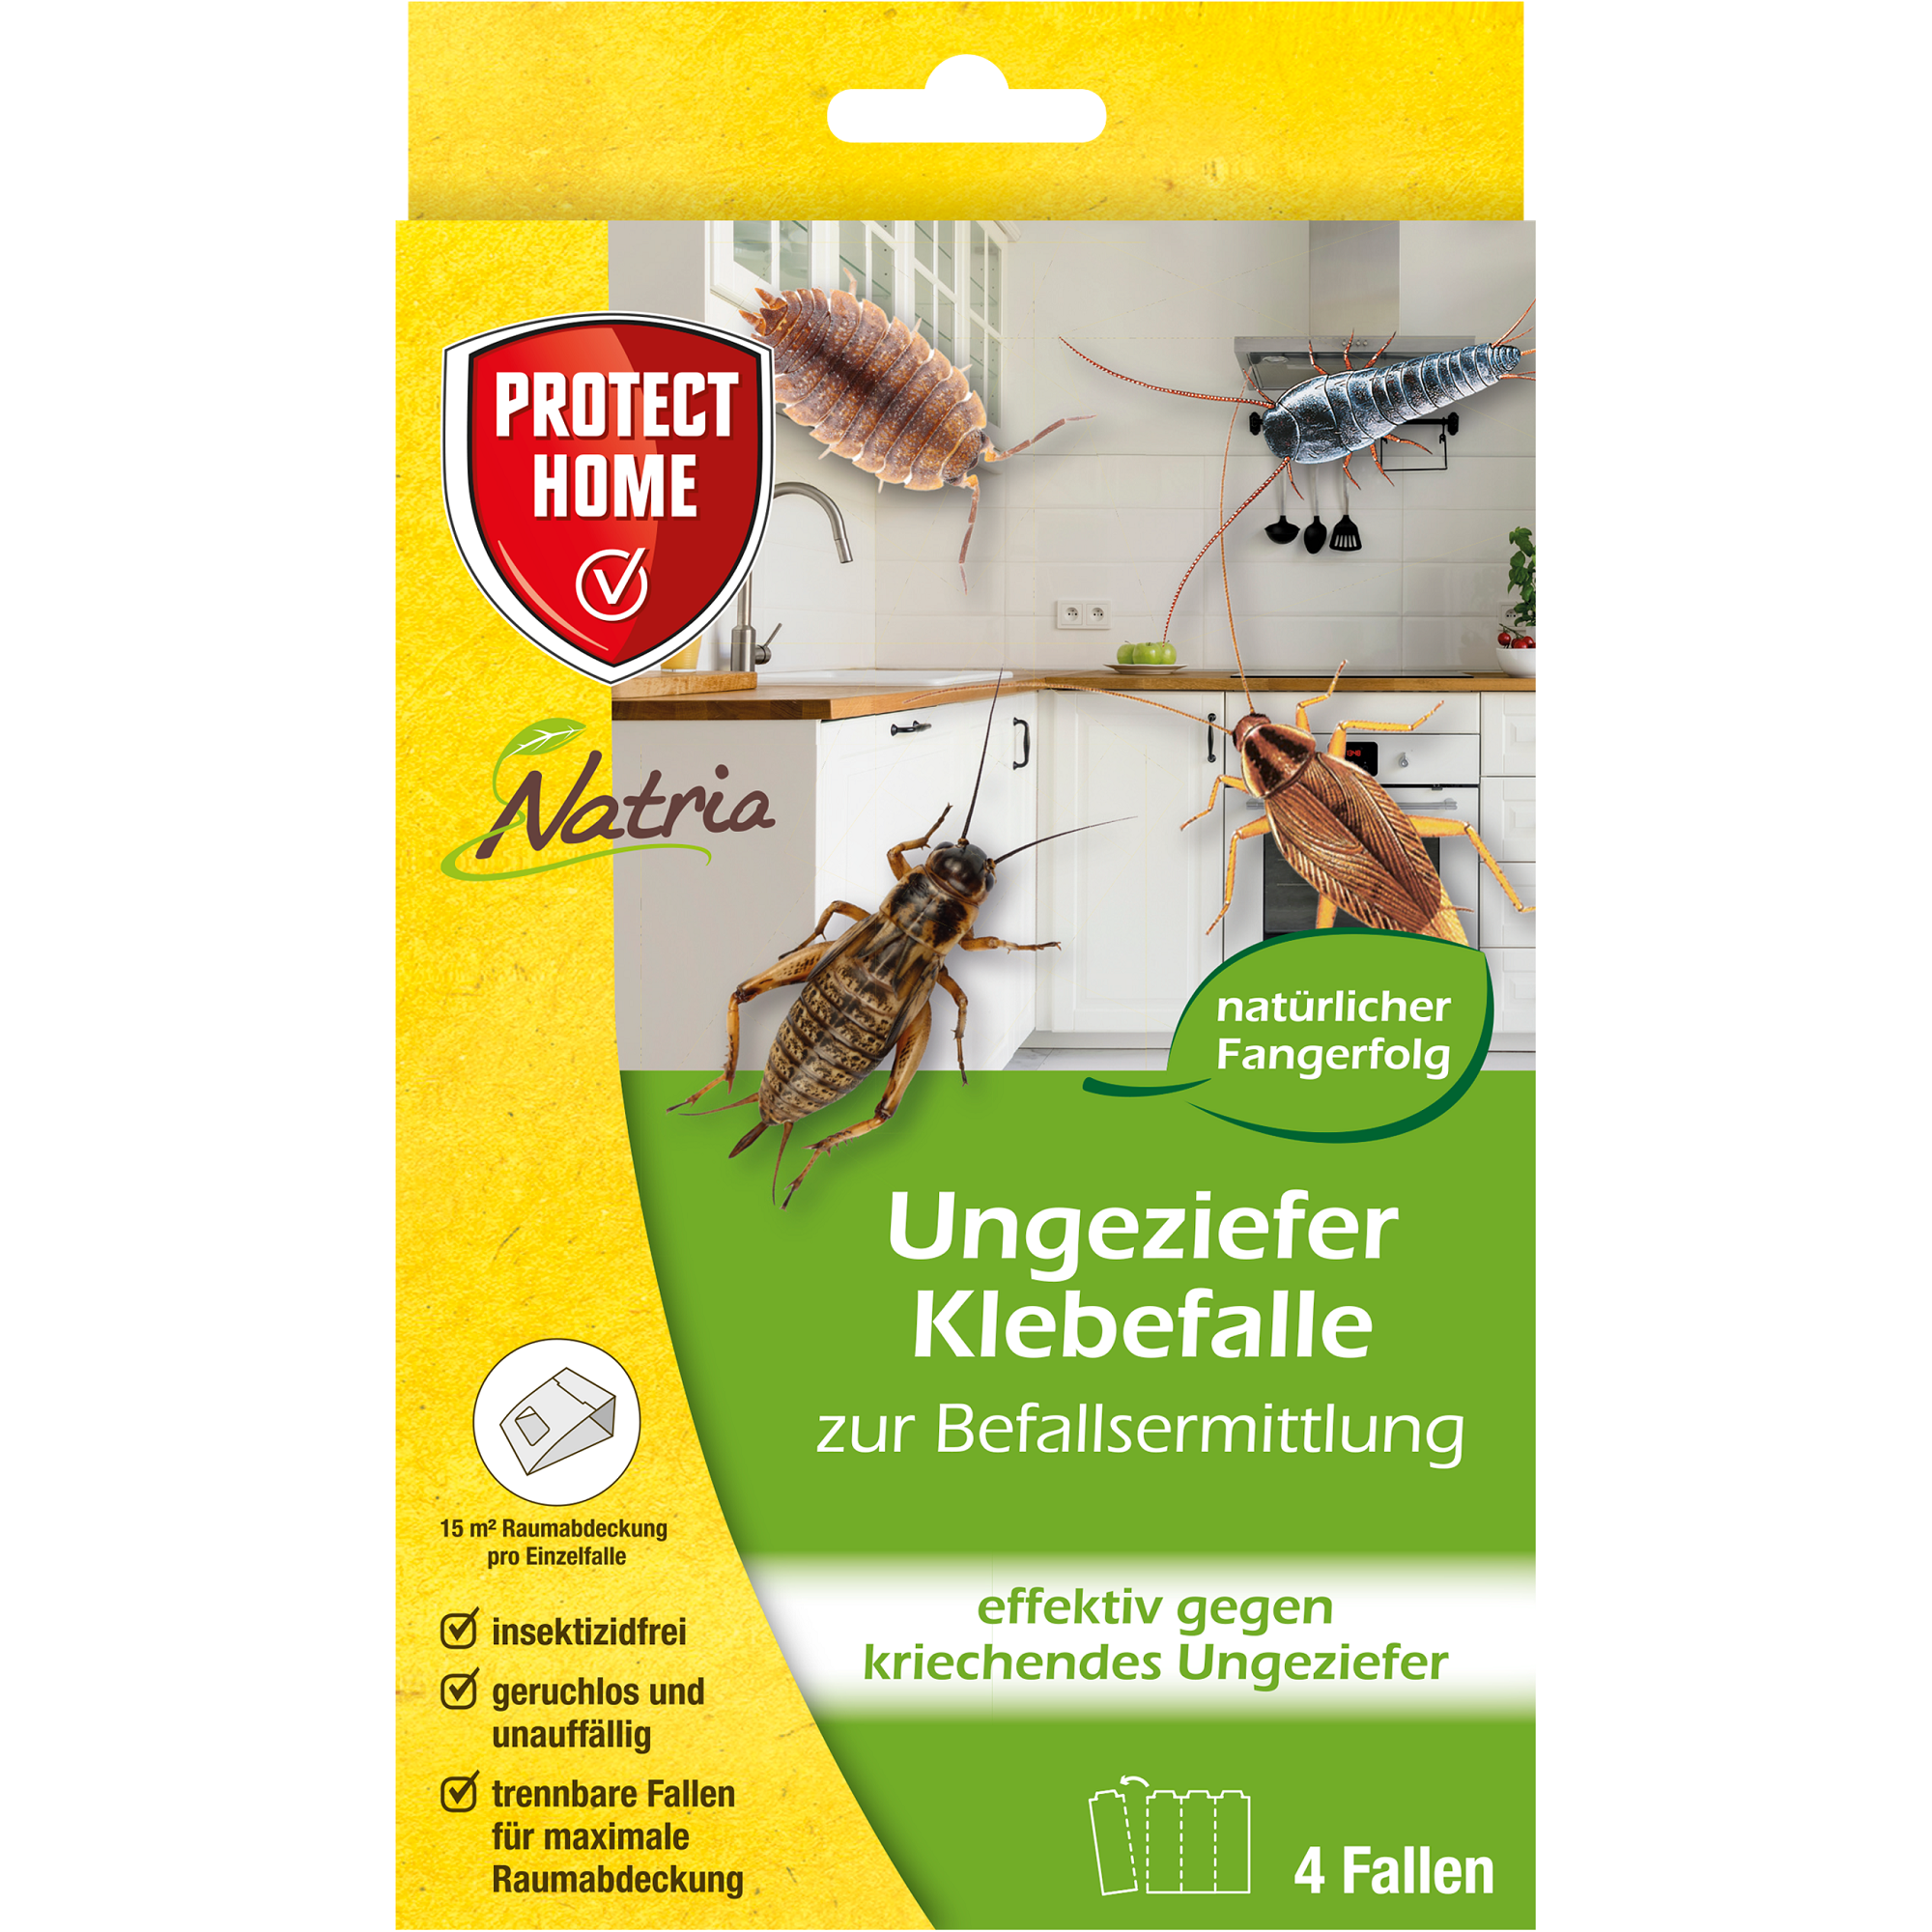 Ungeziefer-Klebefalle 'Natria' 4 Stück + product picture